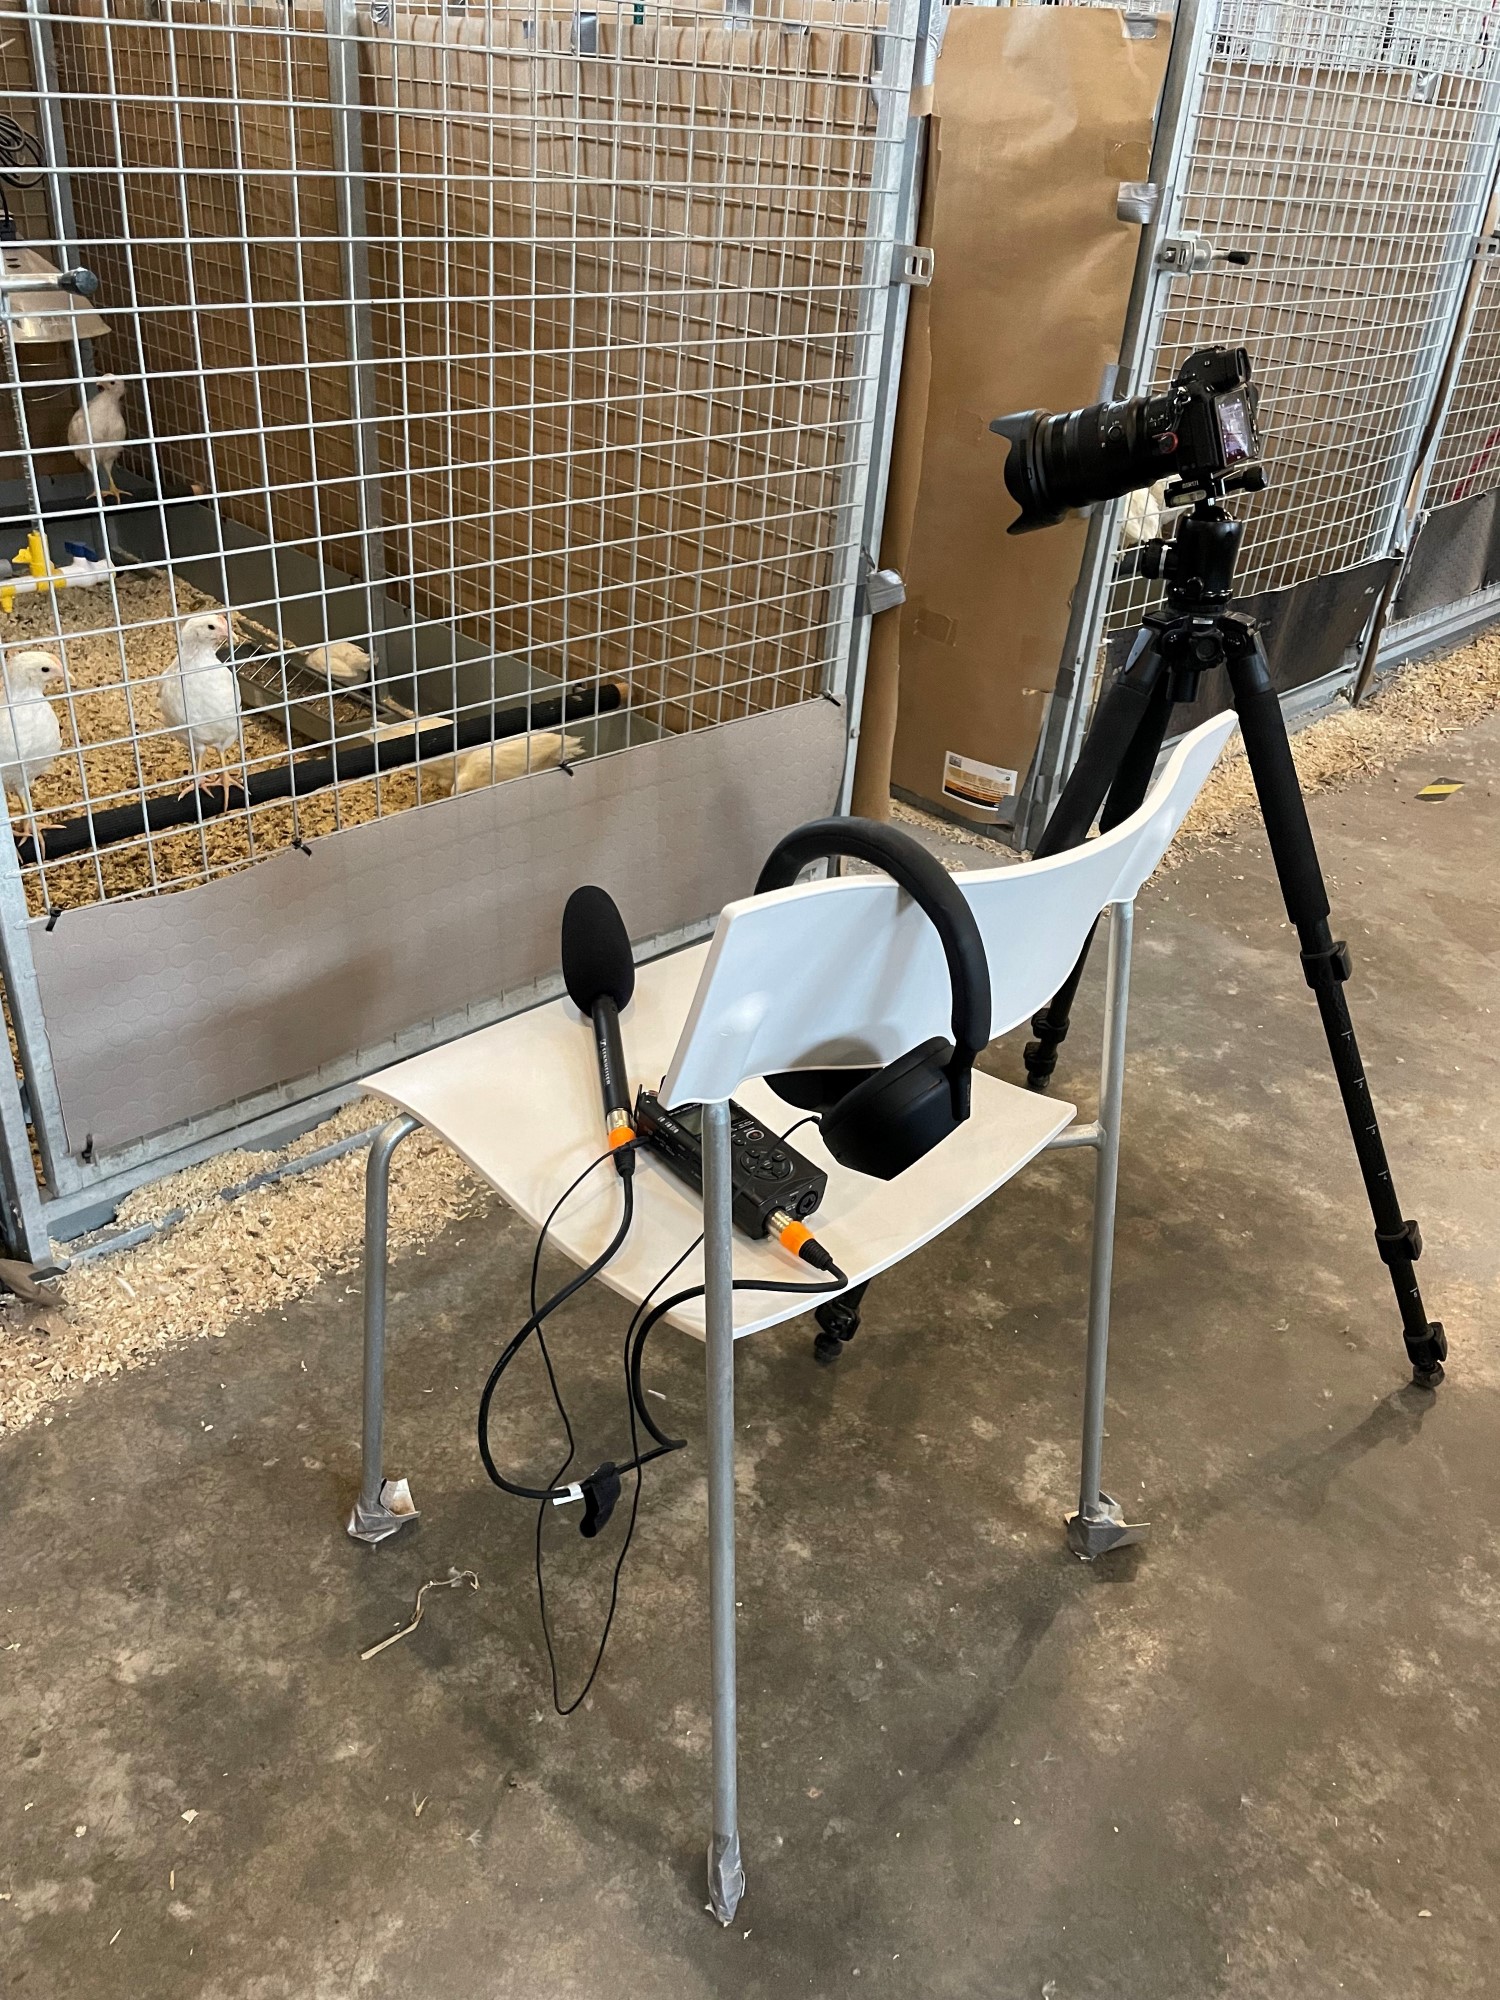 Equipment for audio recording  and a camera on a tripod outside a bird pen